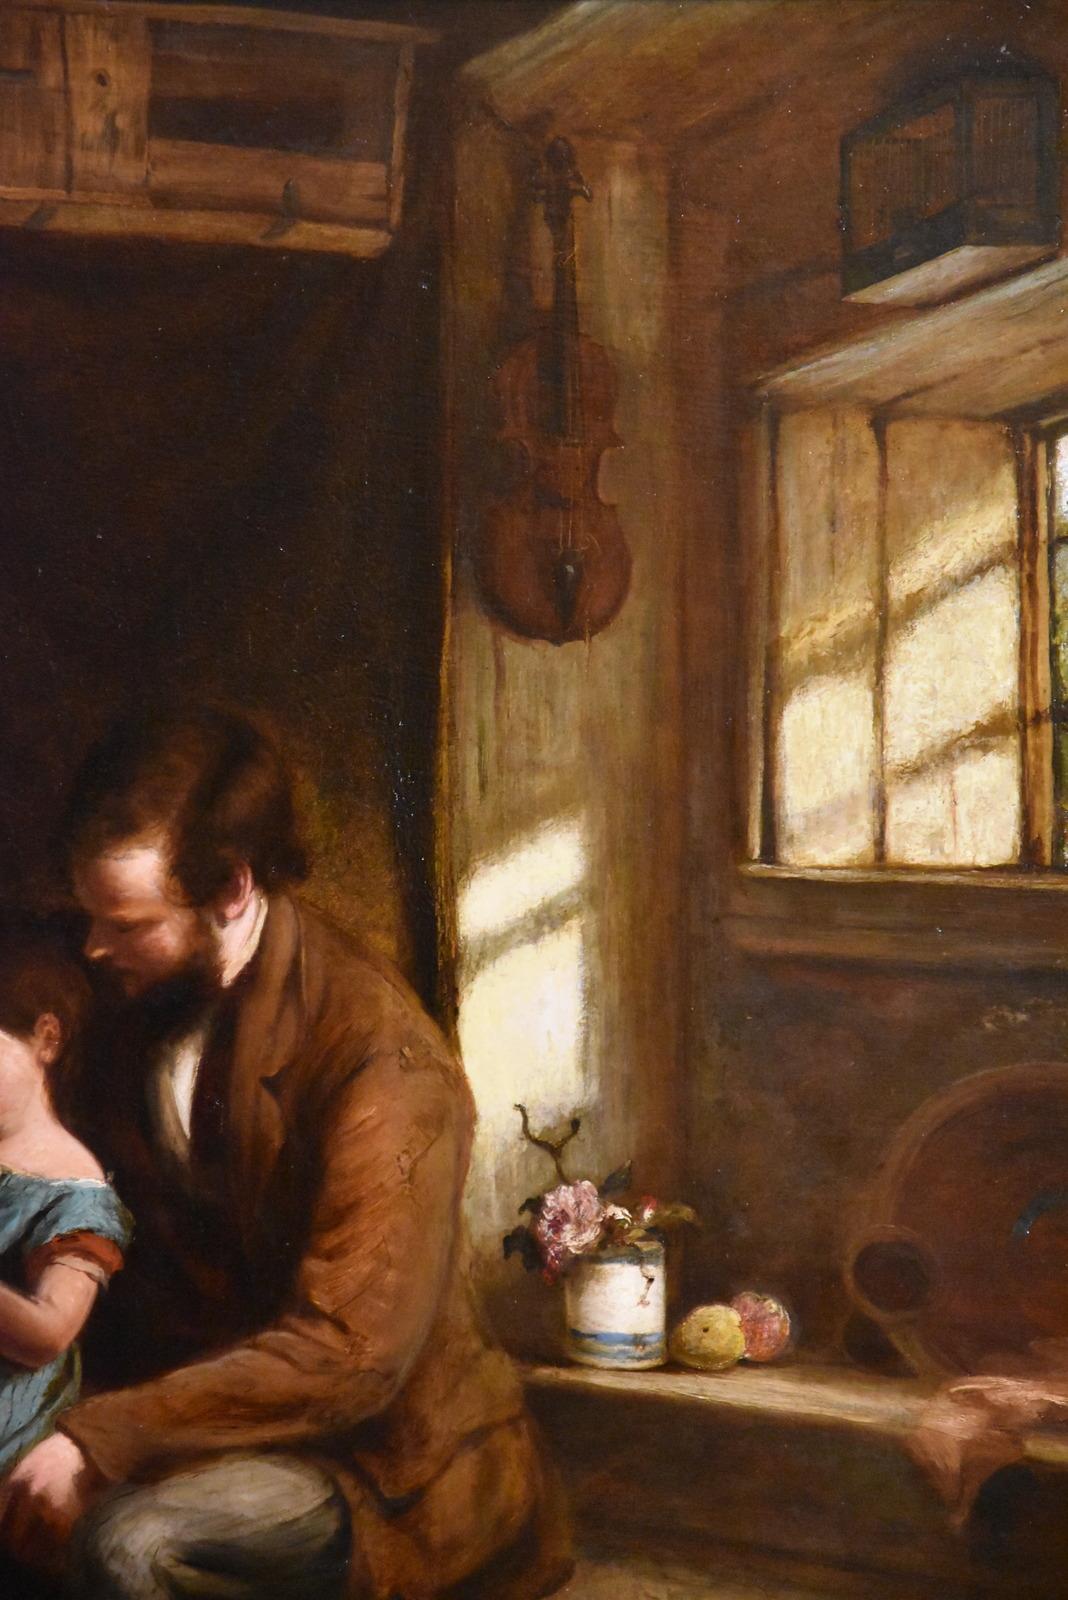 Oil Painting Frederick Johnston “The Reading Lesson” 1855- 1868. London painter of domestic genre scenes. He exhibited at the Royal Academy, Royal society of British Artists and British Institution represented in the Science museum. Oil on canvas.